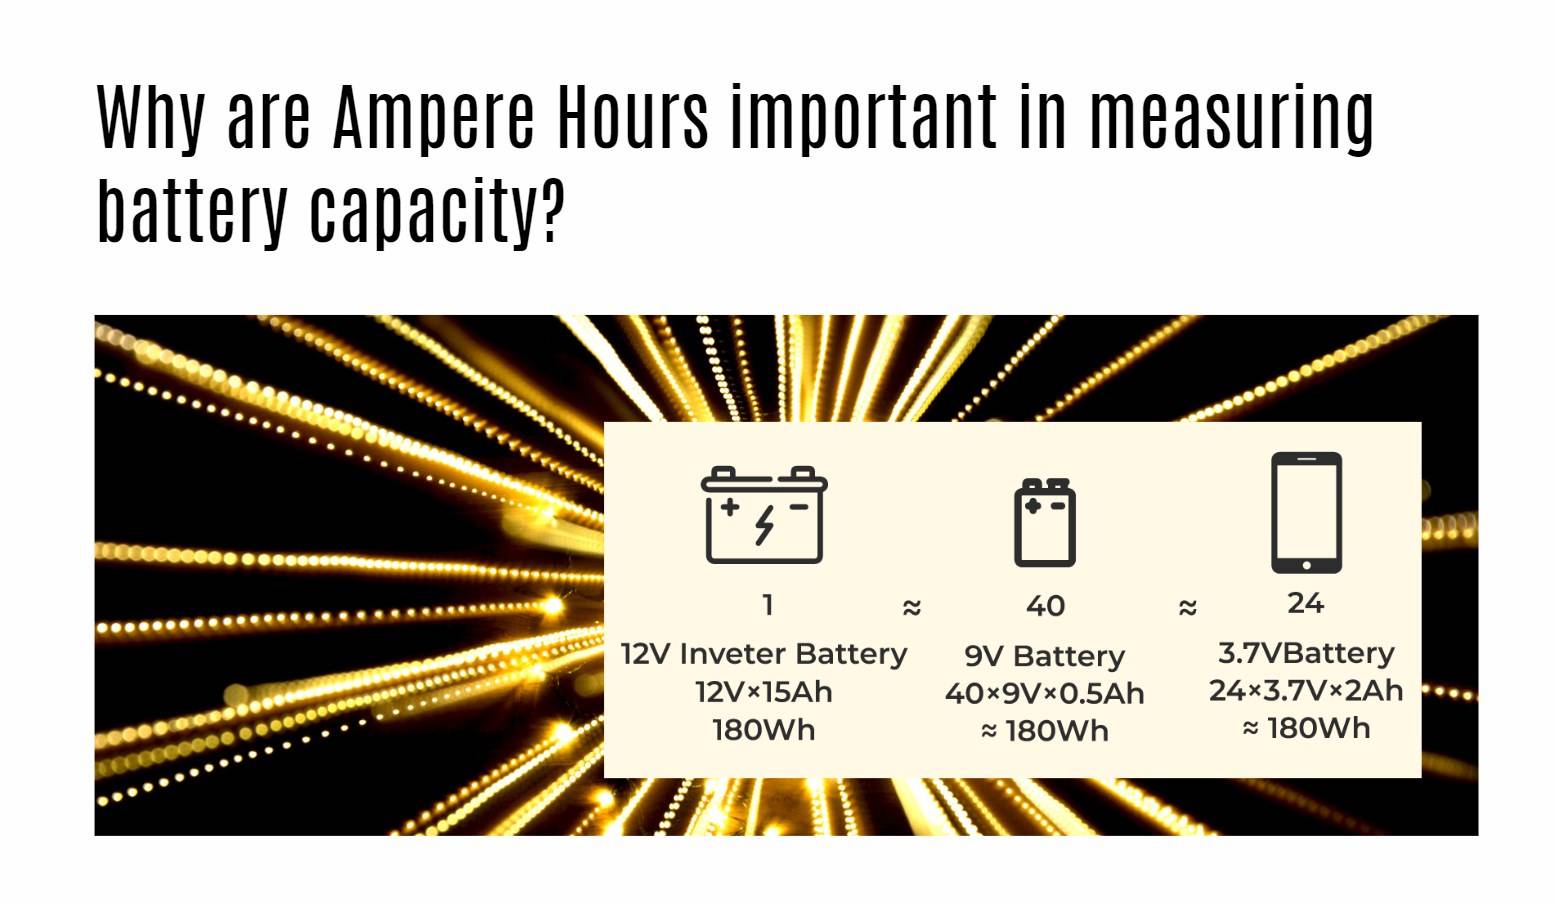 Why are Ampere Hours important in measuring battery capacity?